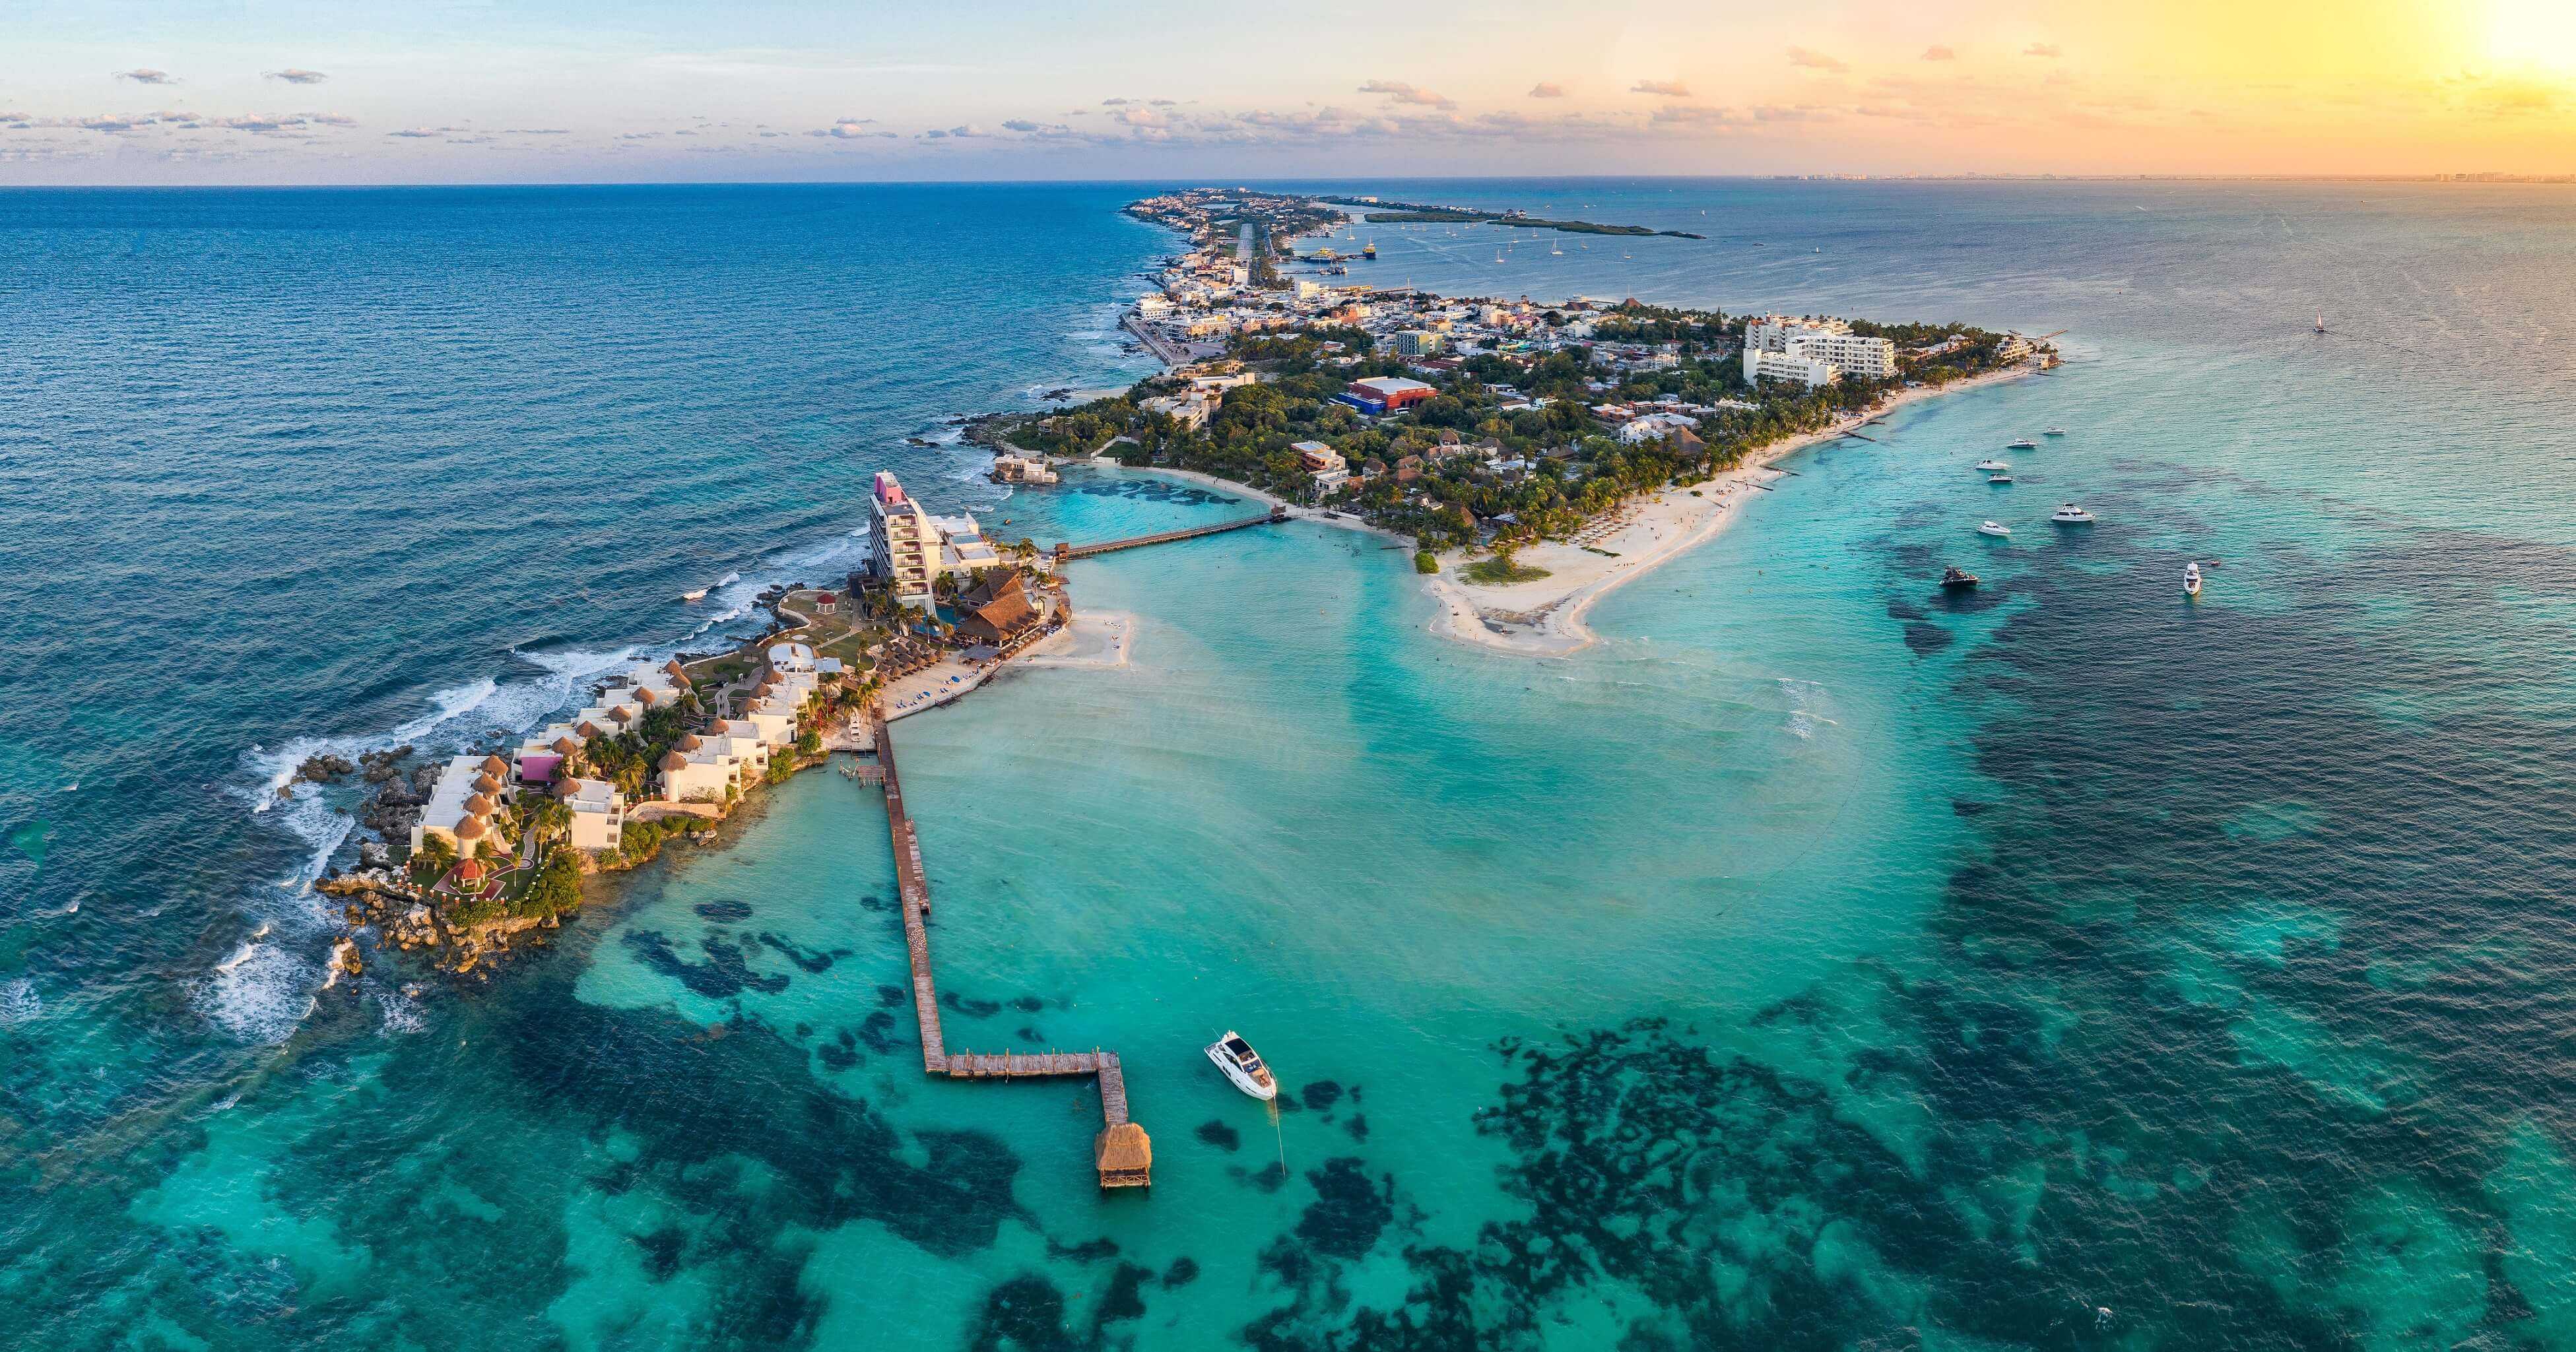 13 Best Things to Do in Isla Mujeres, Mexico [Insider Tips]